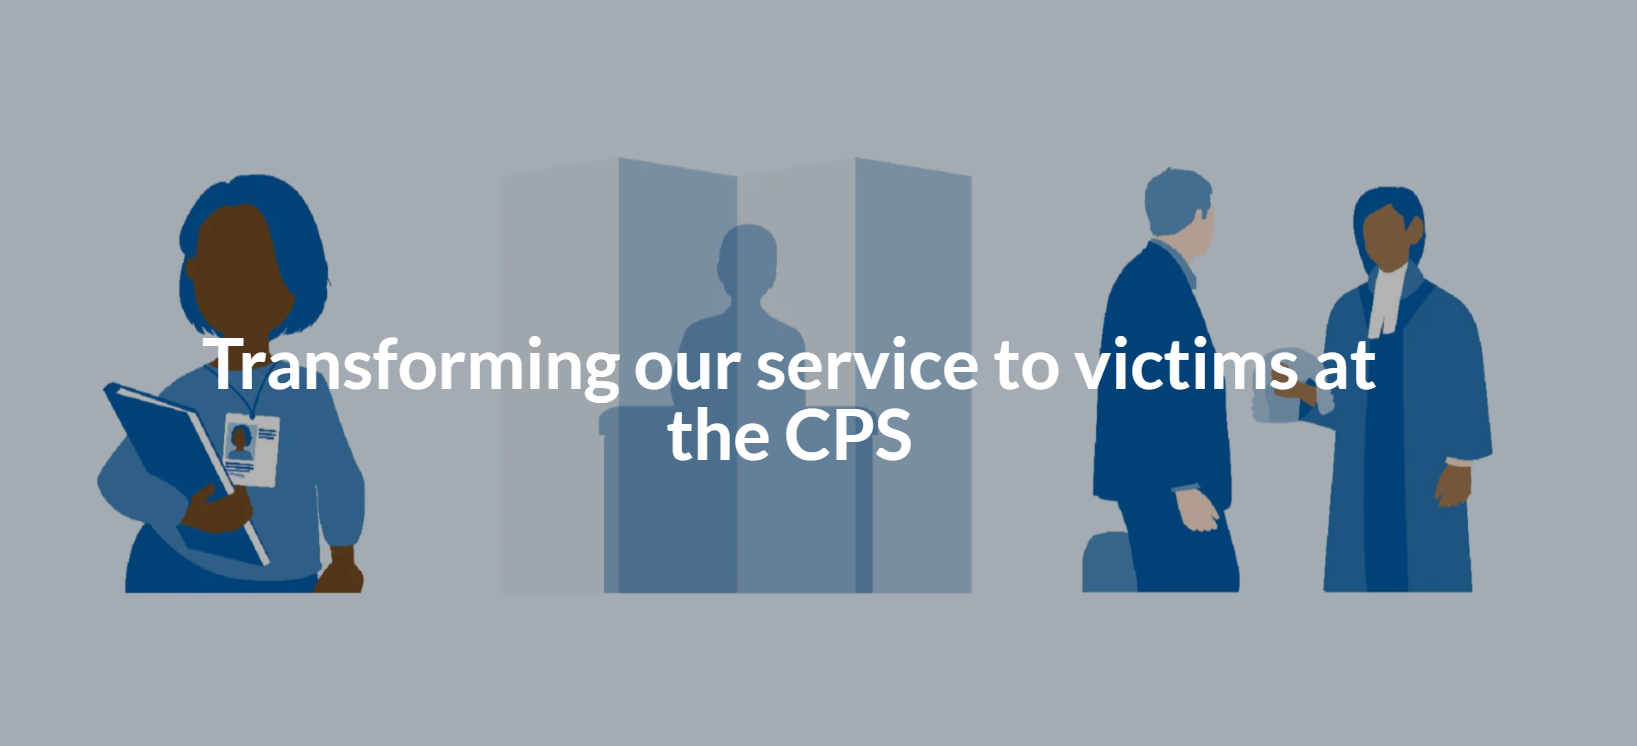 Transforming our service to victims at the CPS